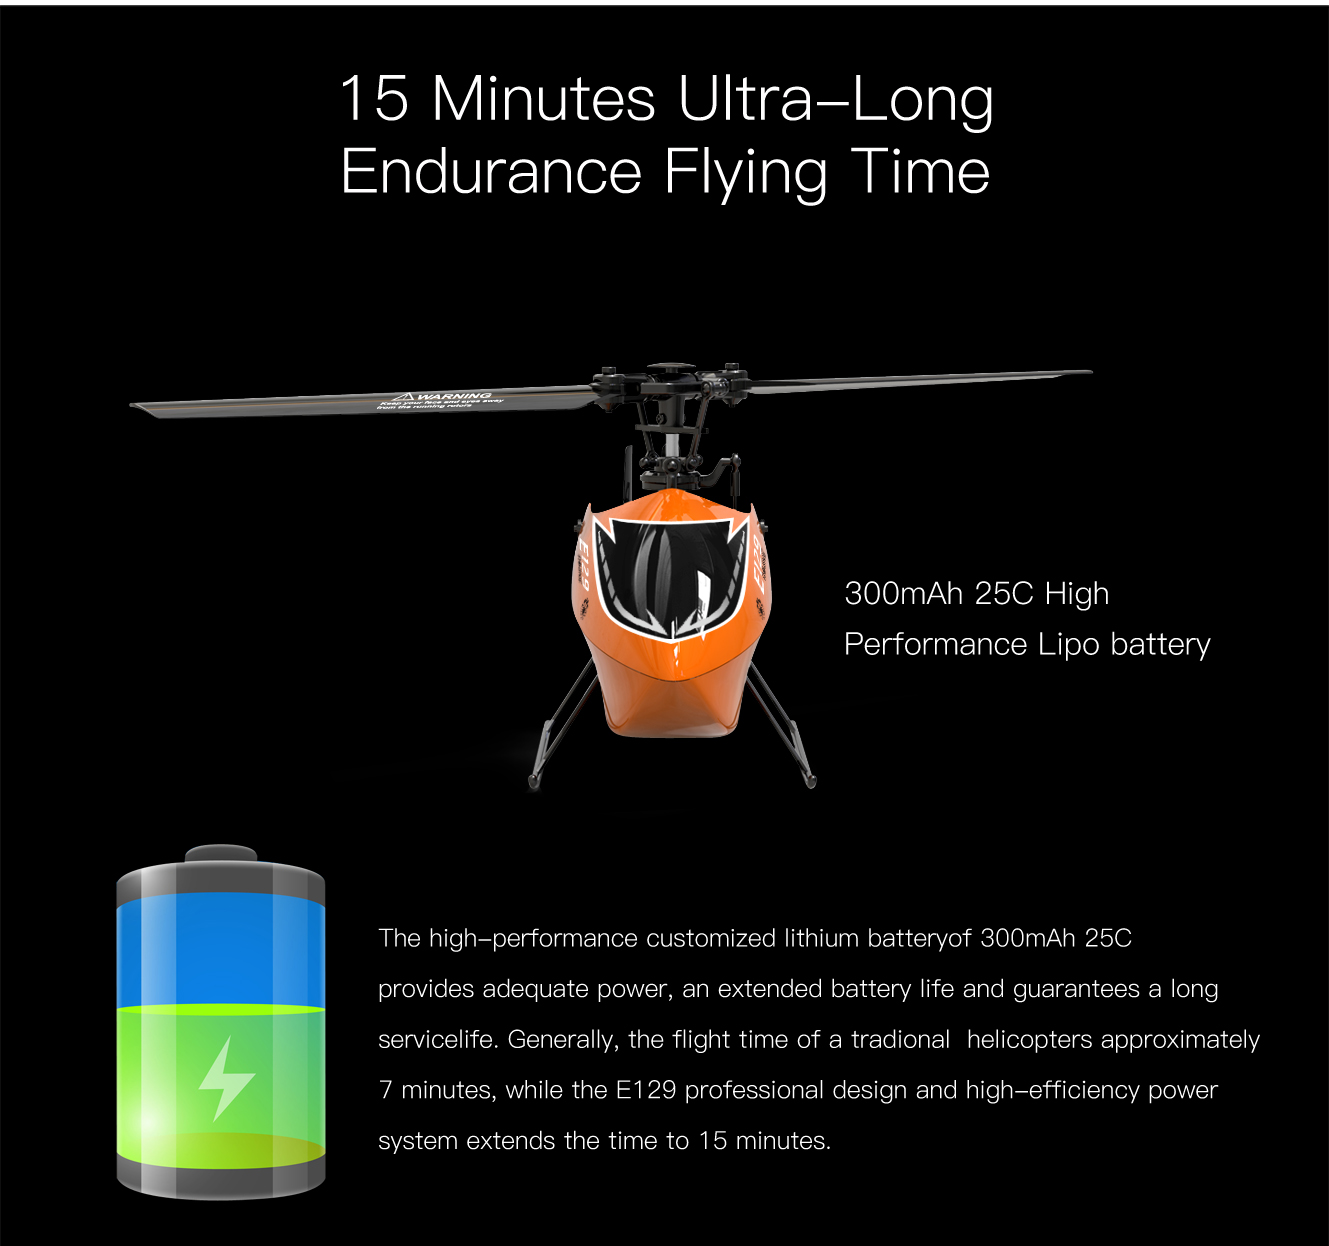 Eachine-E129-24G-4CH-6-Axis-Gyro-Altitude-Hold-Flybarless-RC-Helicopter-RTF-1738482-7